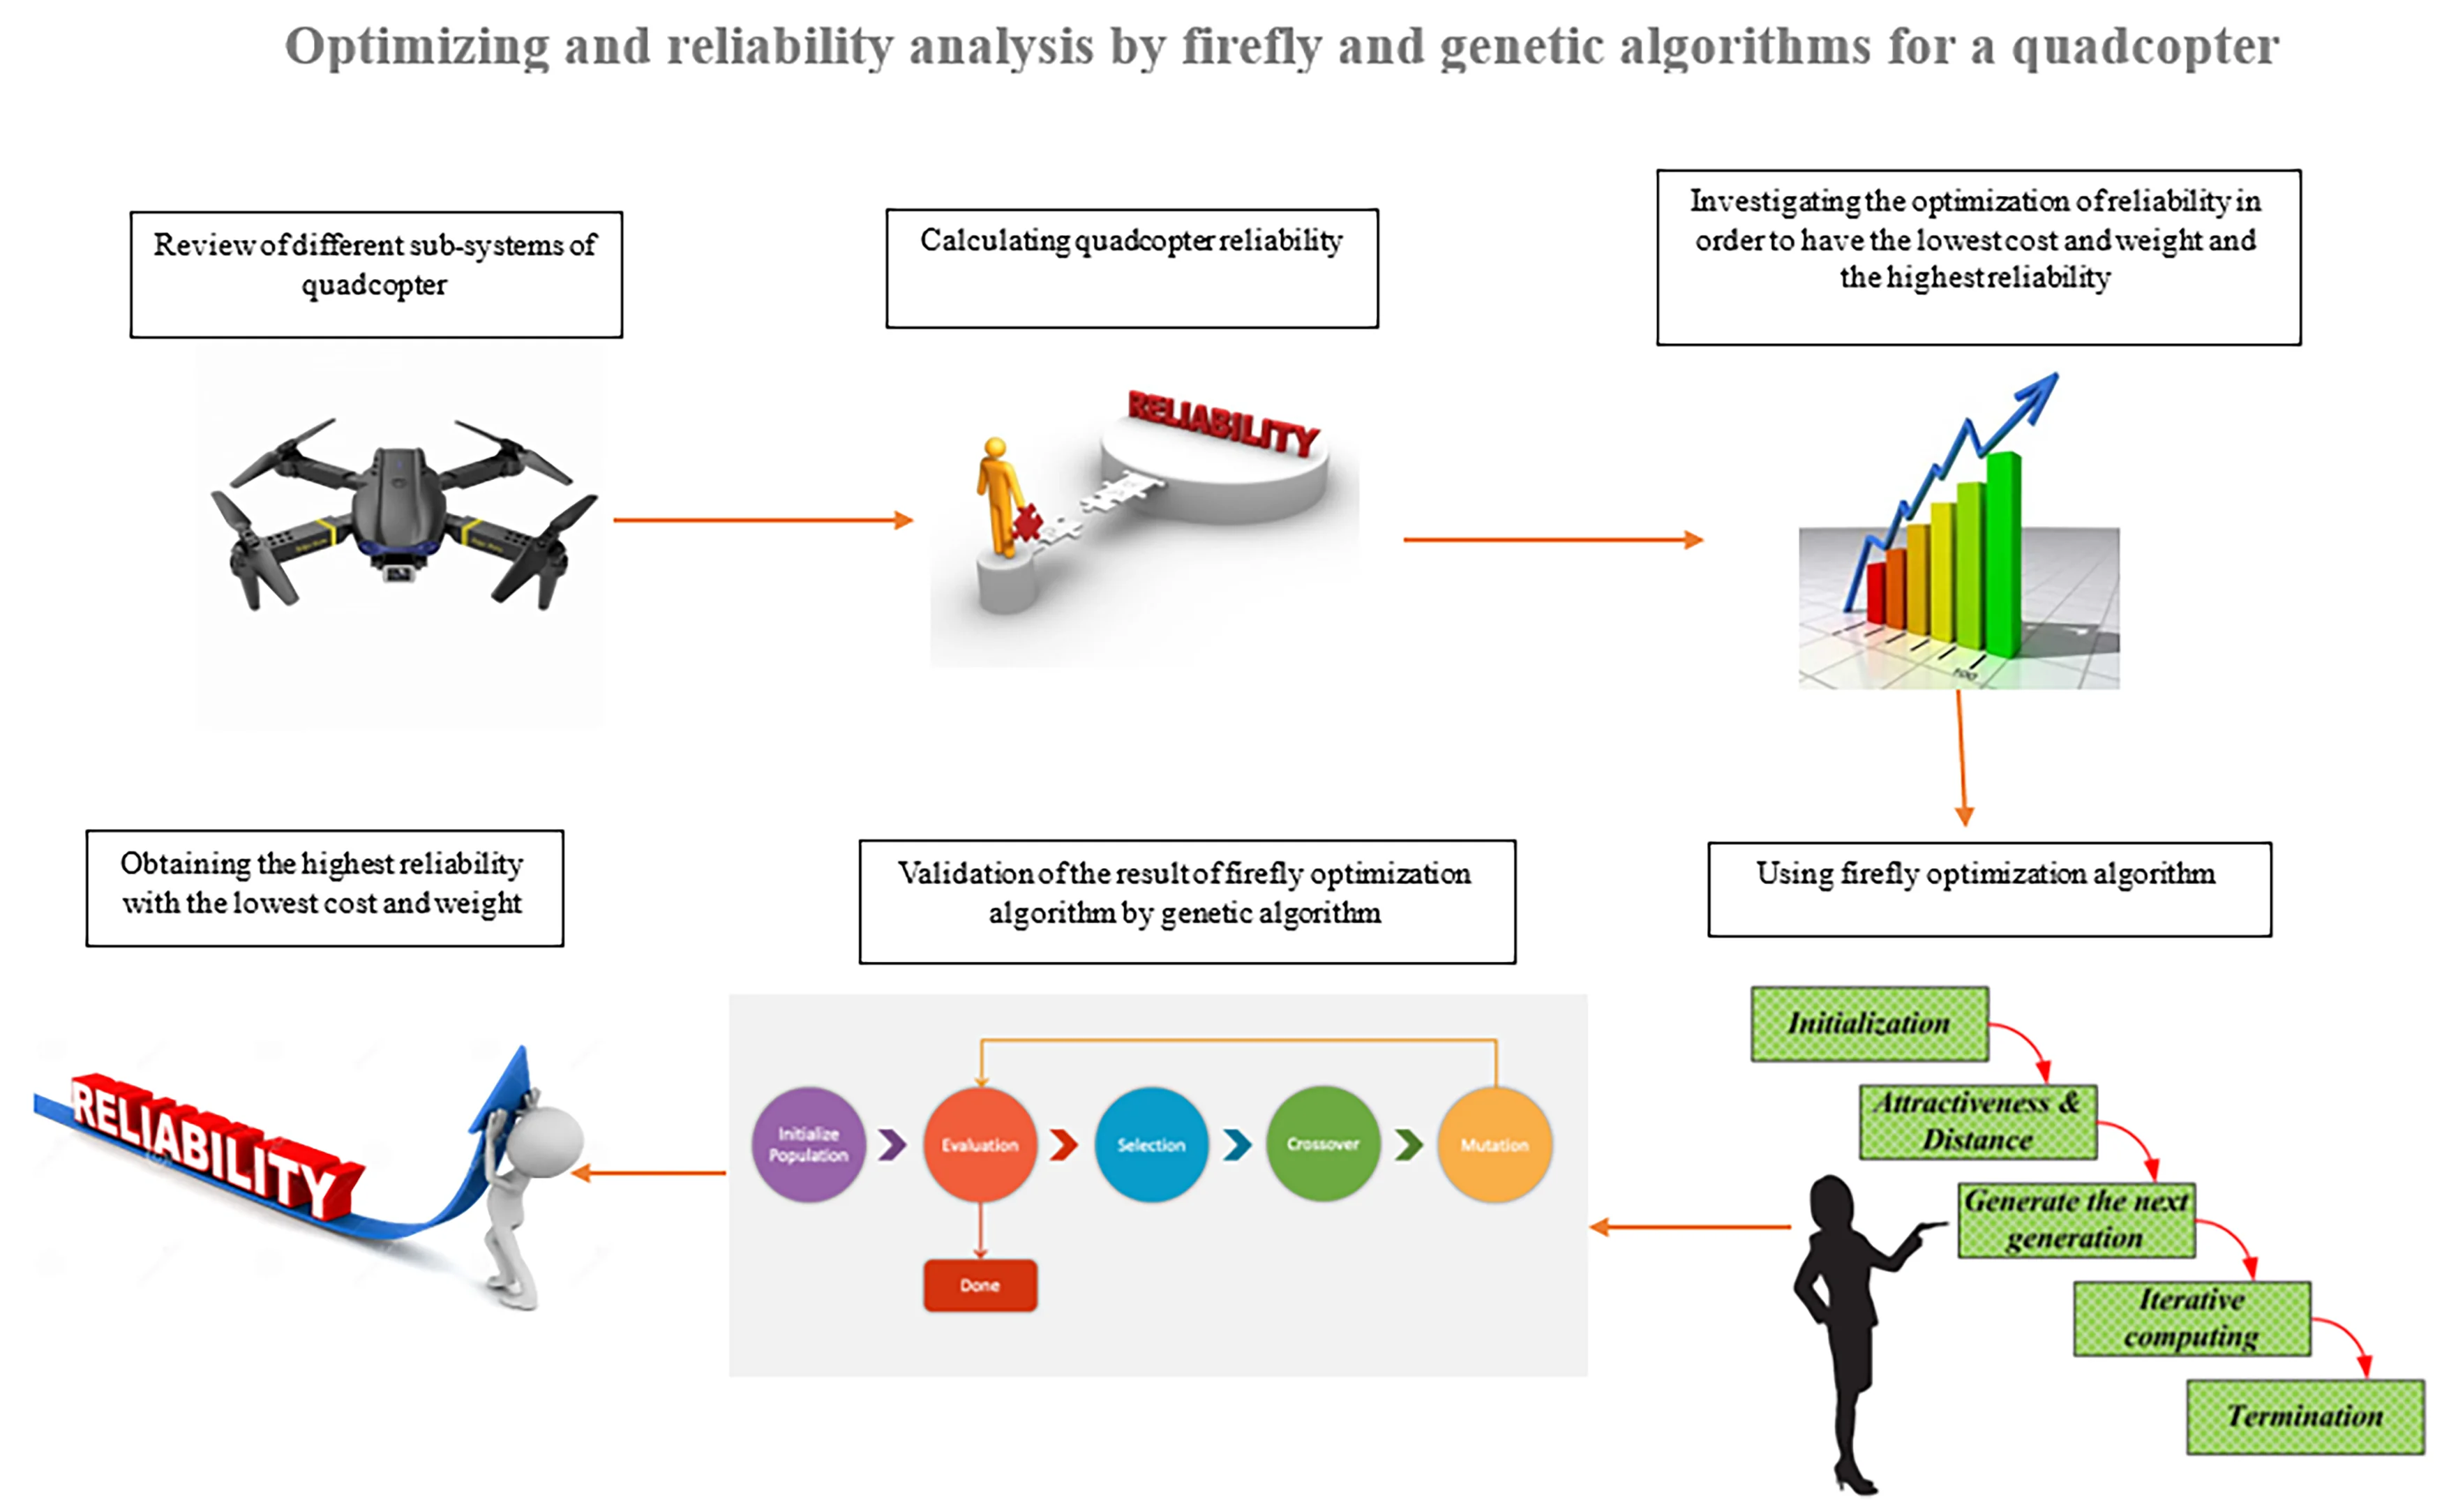 Optimizing and reliability analysis by firefly and genetic algorithms for a quadcopter